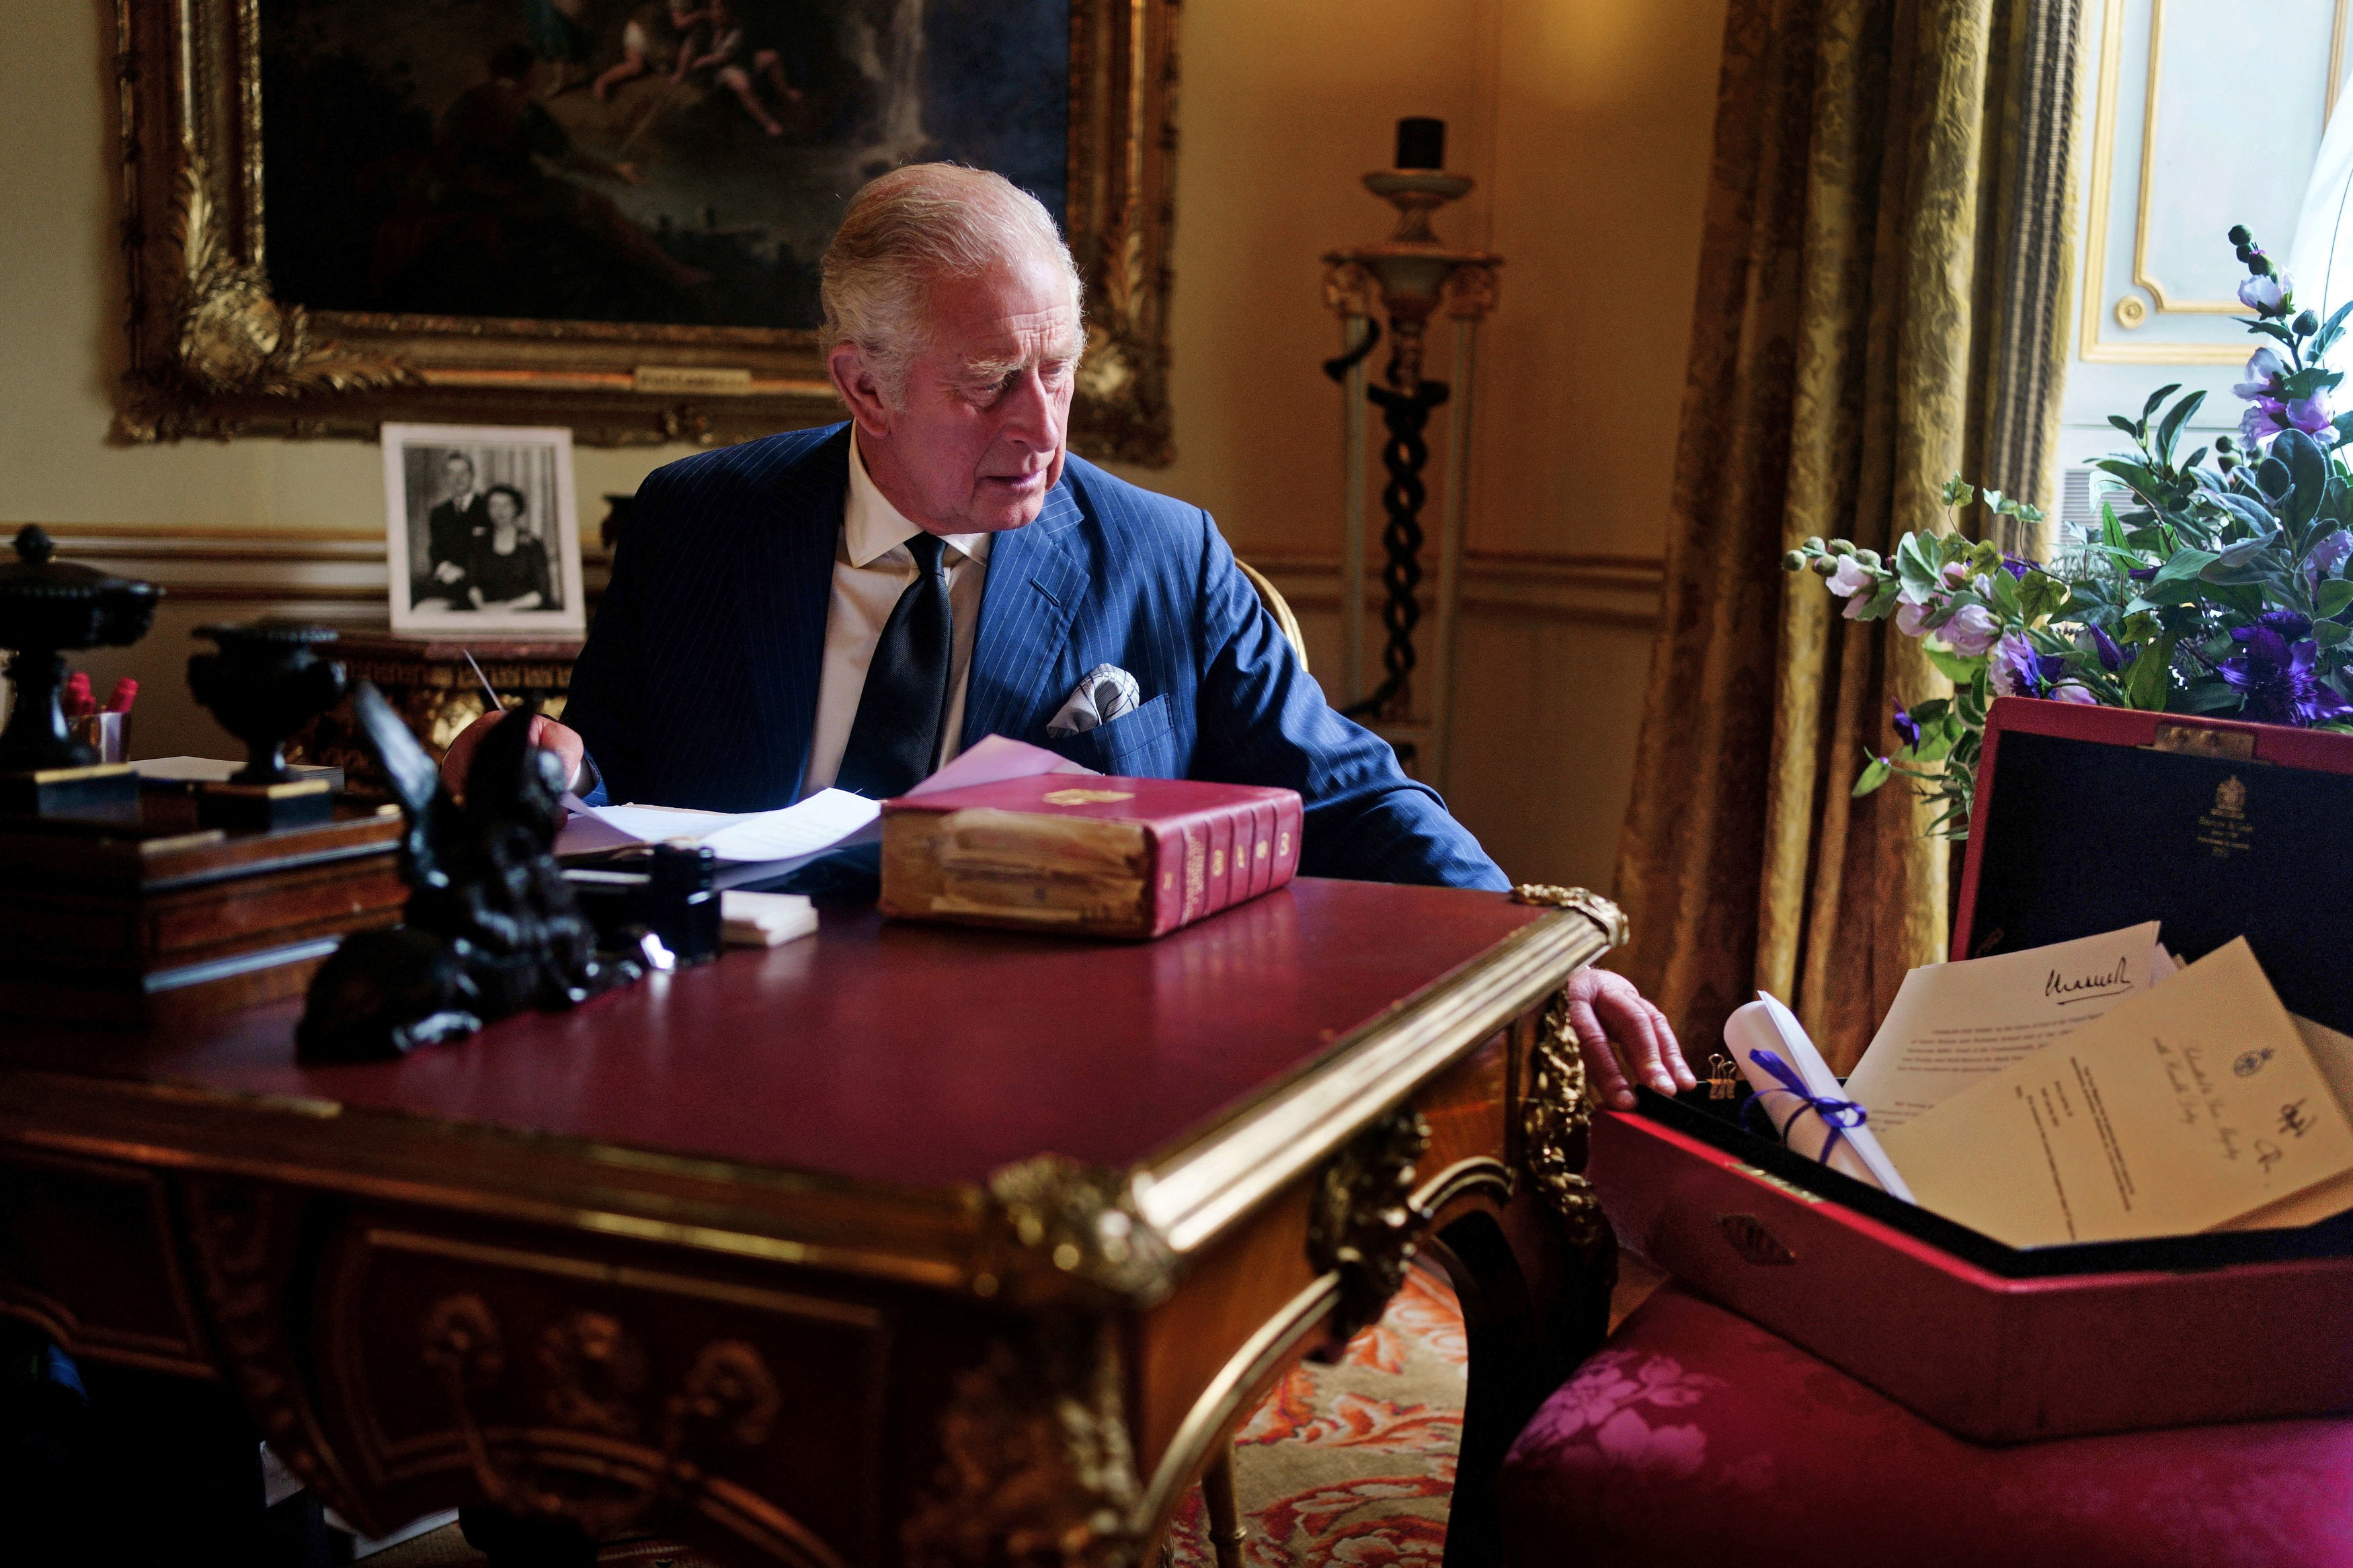 King Charles pictured with official red box in new photo | Reuters